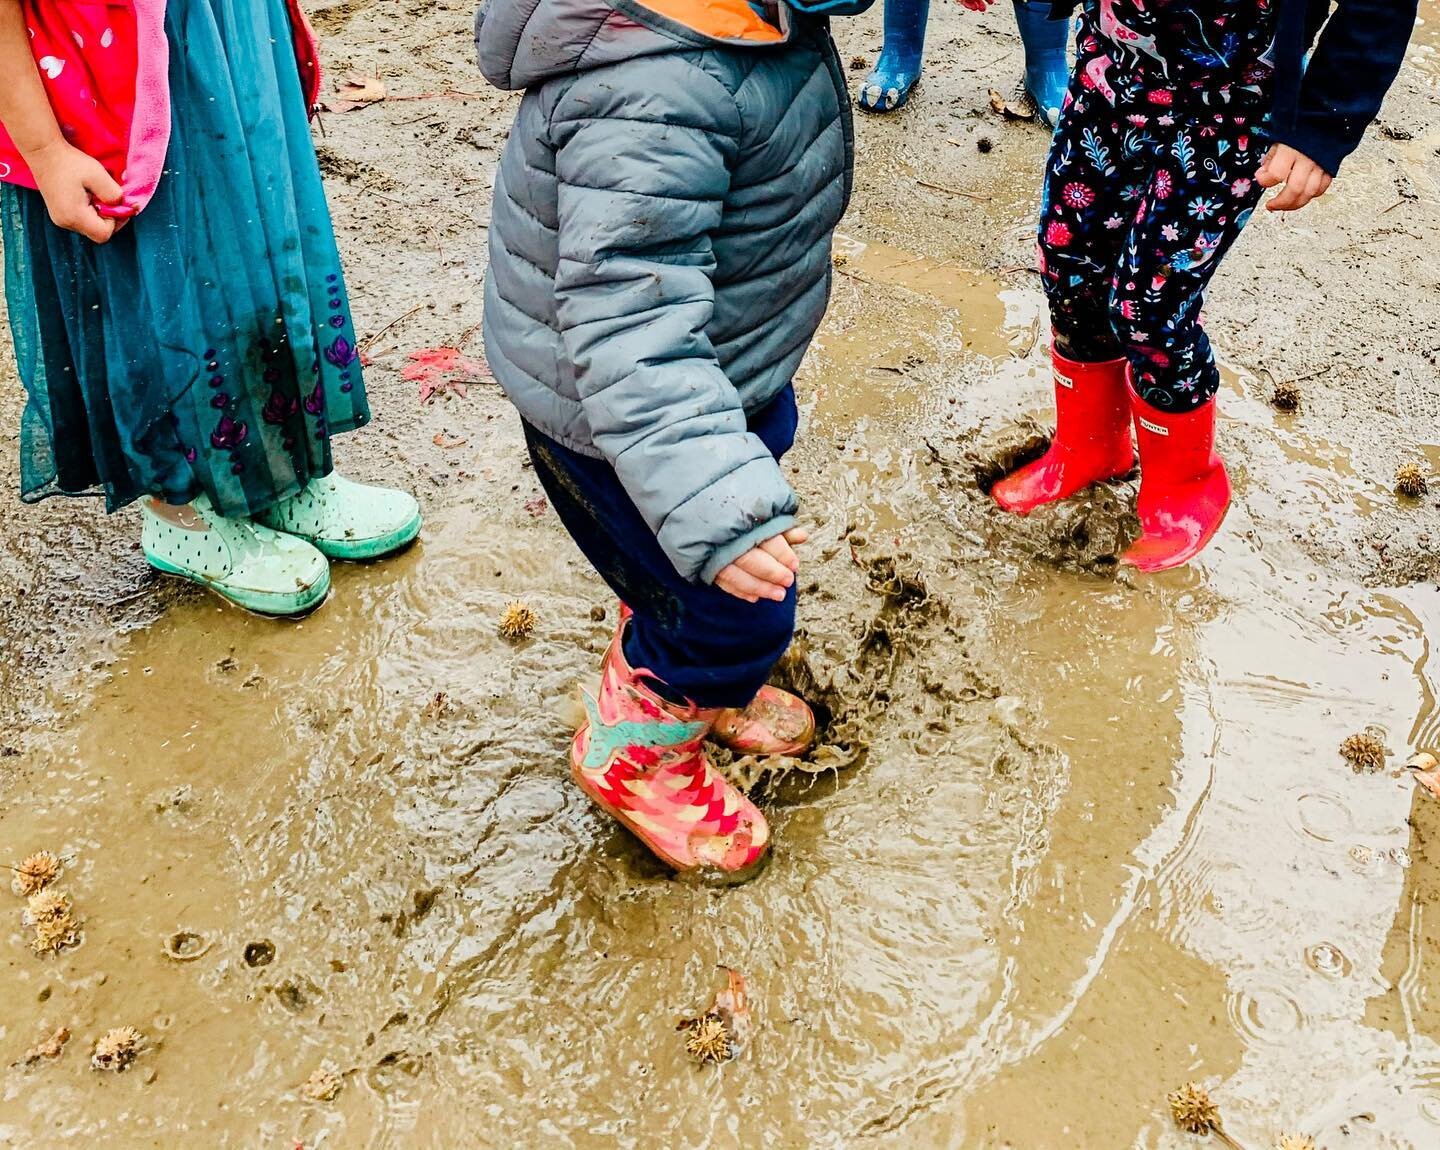 Rain brings a whole new wold of play to the yard. 💦 What are your favorite rainy day activities?

Image Description: Three students in rubber boots and shoes splash in the mud.

#preschool #preschoolActivities #EarlyChildhoodEducation #TactileLearni